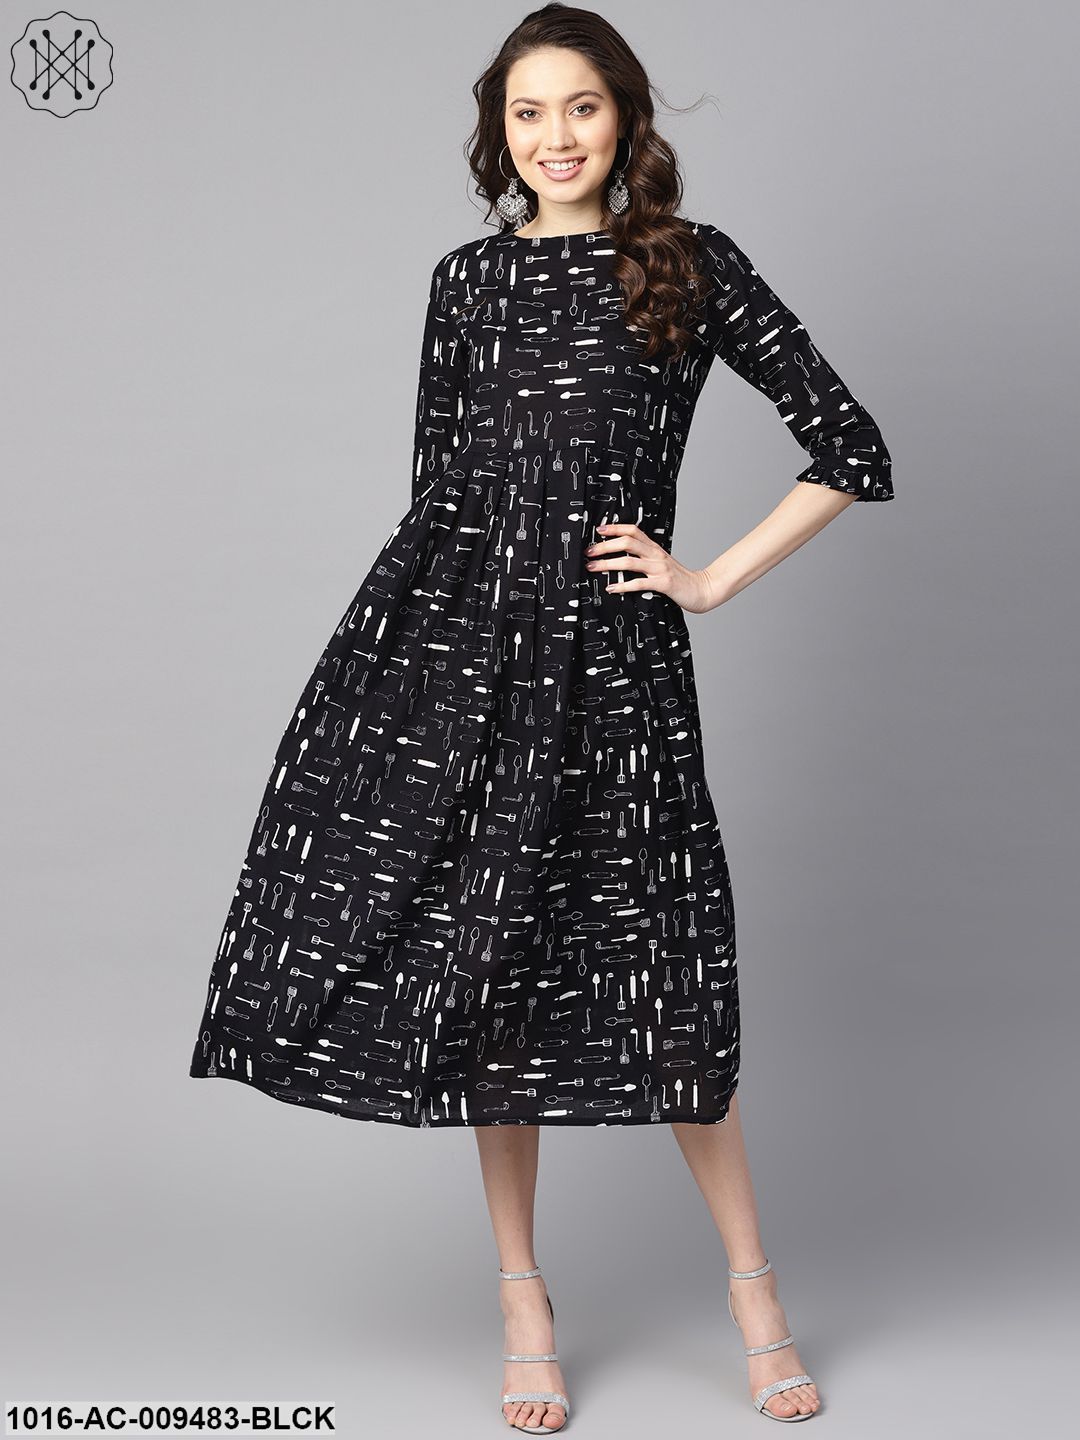 Quirky Spoon Print Box Pleated Dress With Frilled Sleeves